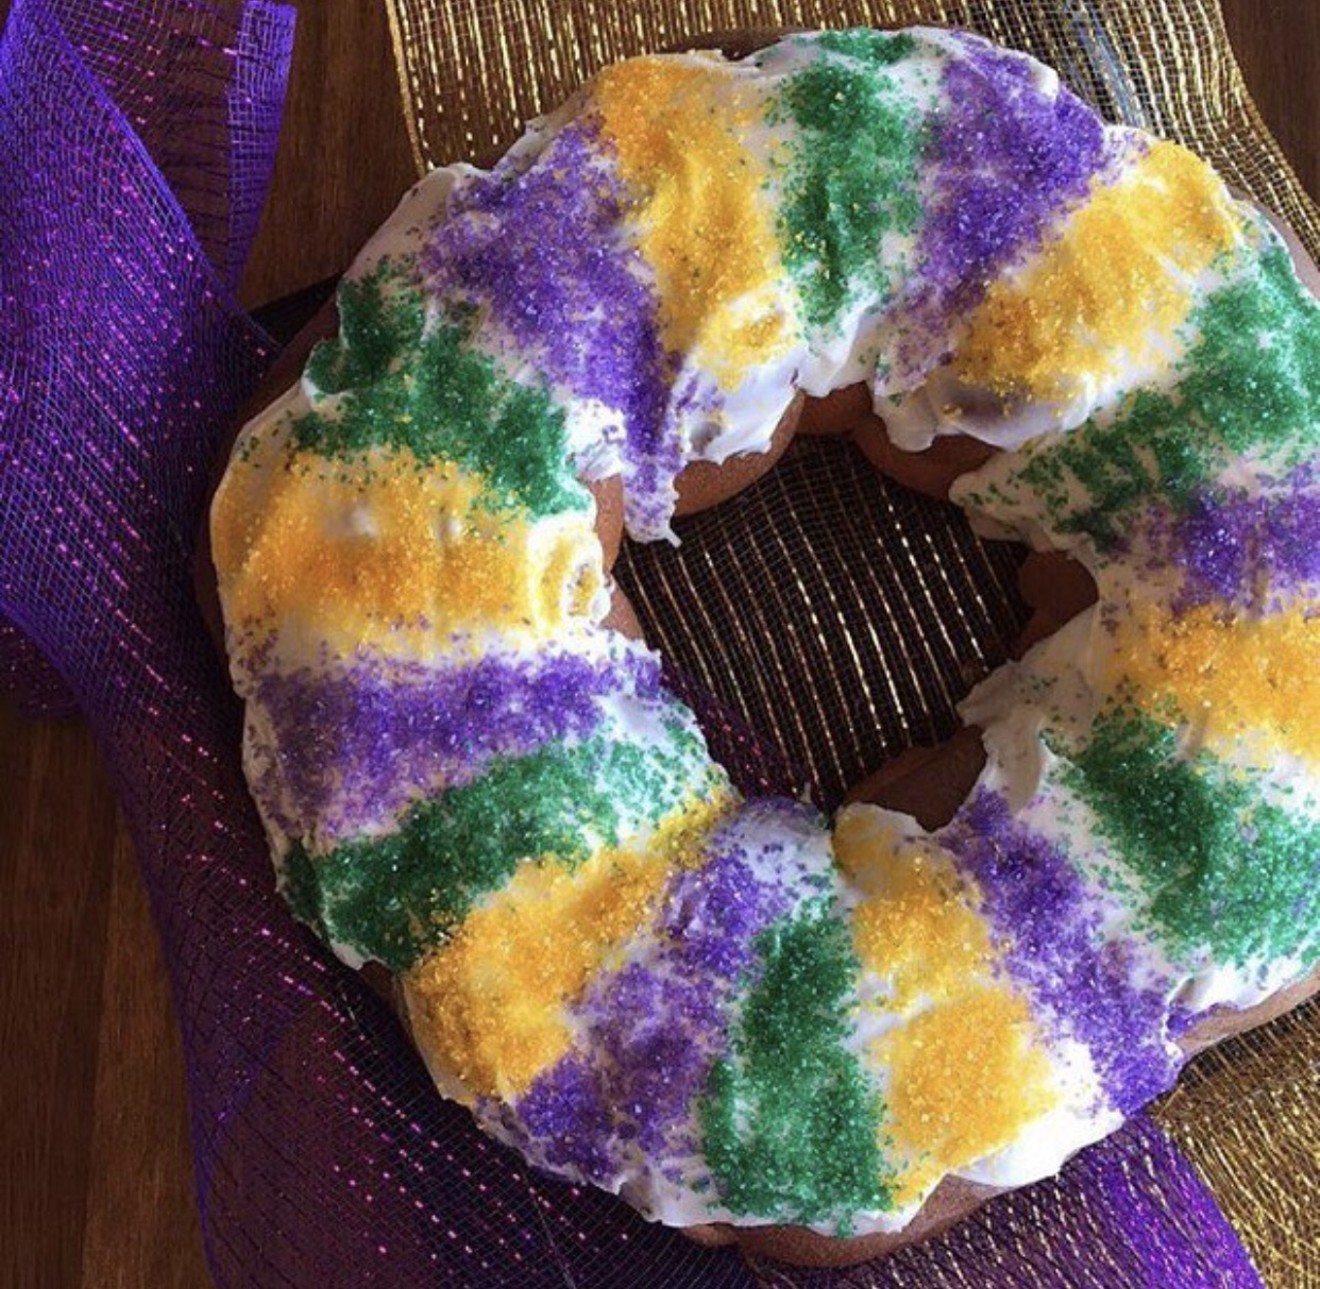 Snack on King Cake, a Fat Tuesday favorite made with cinnamon brioche and glazed with icing and colorful sprinkles.